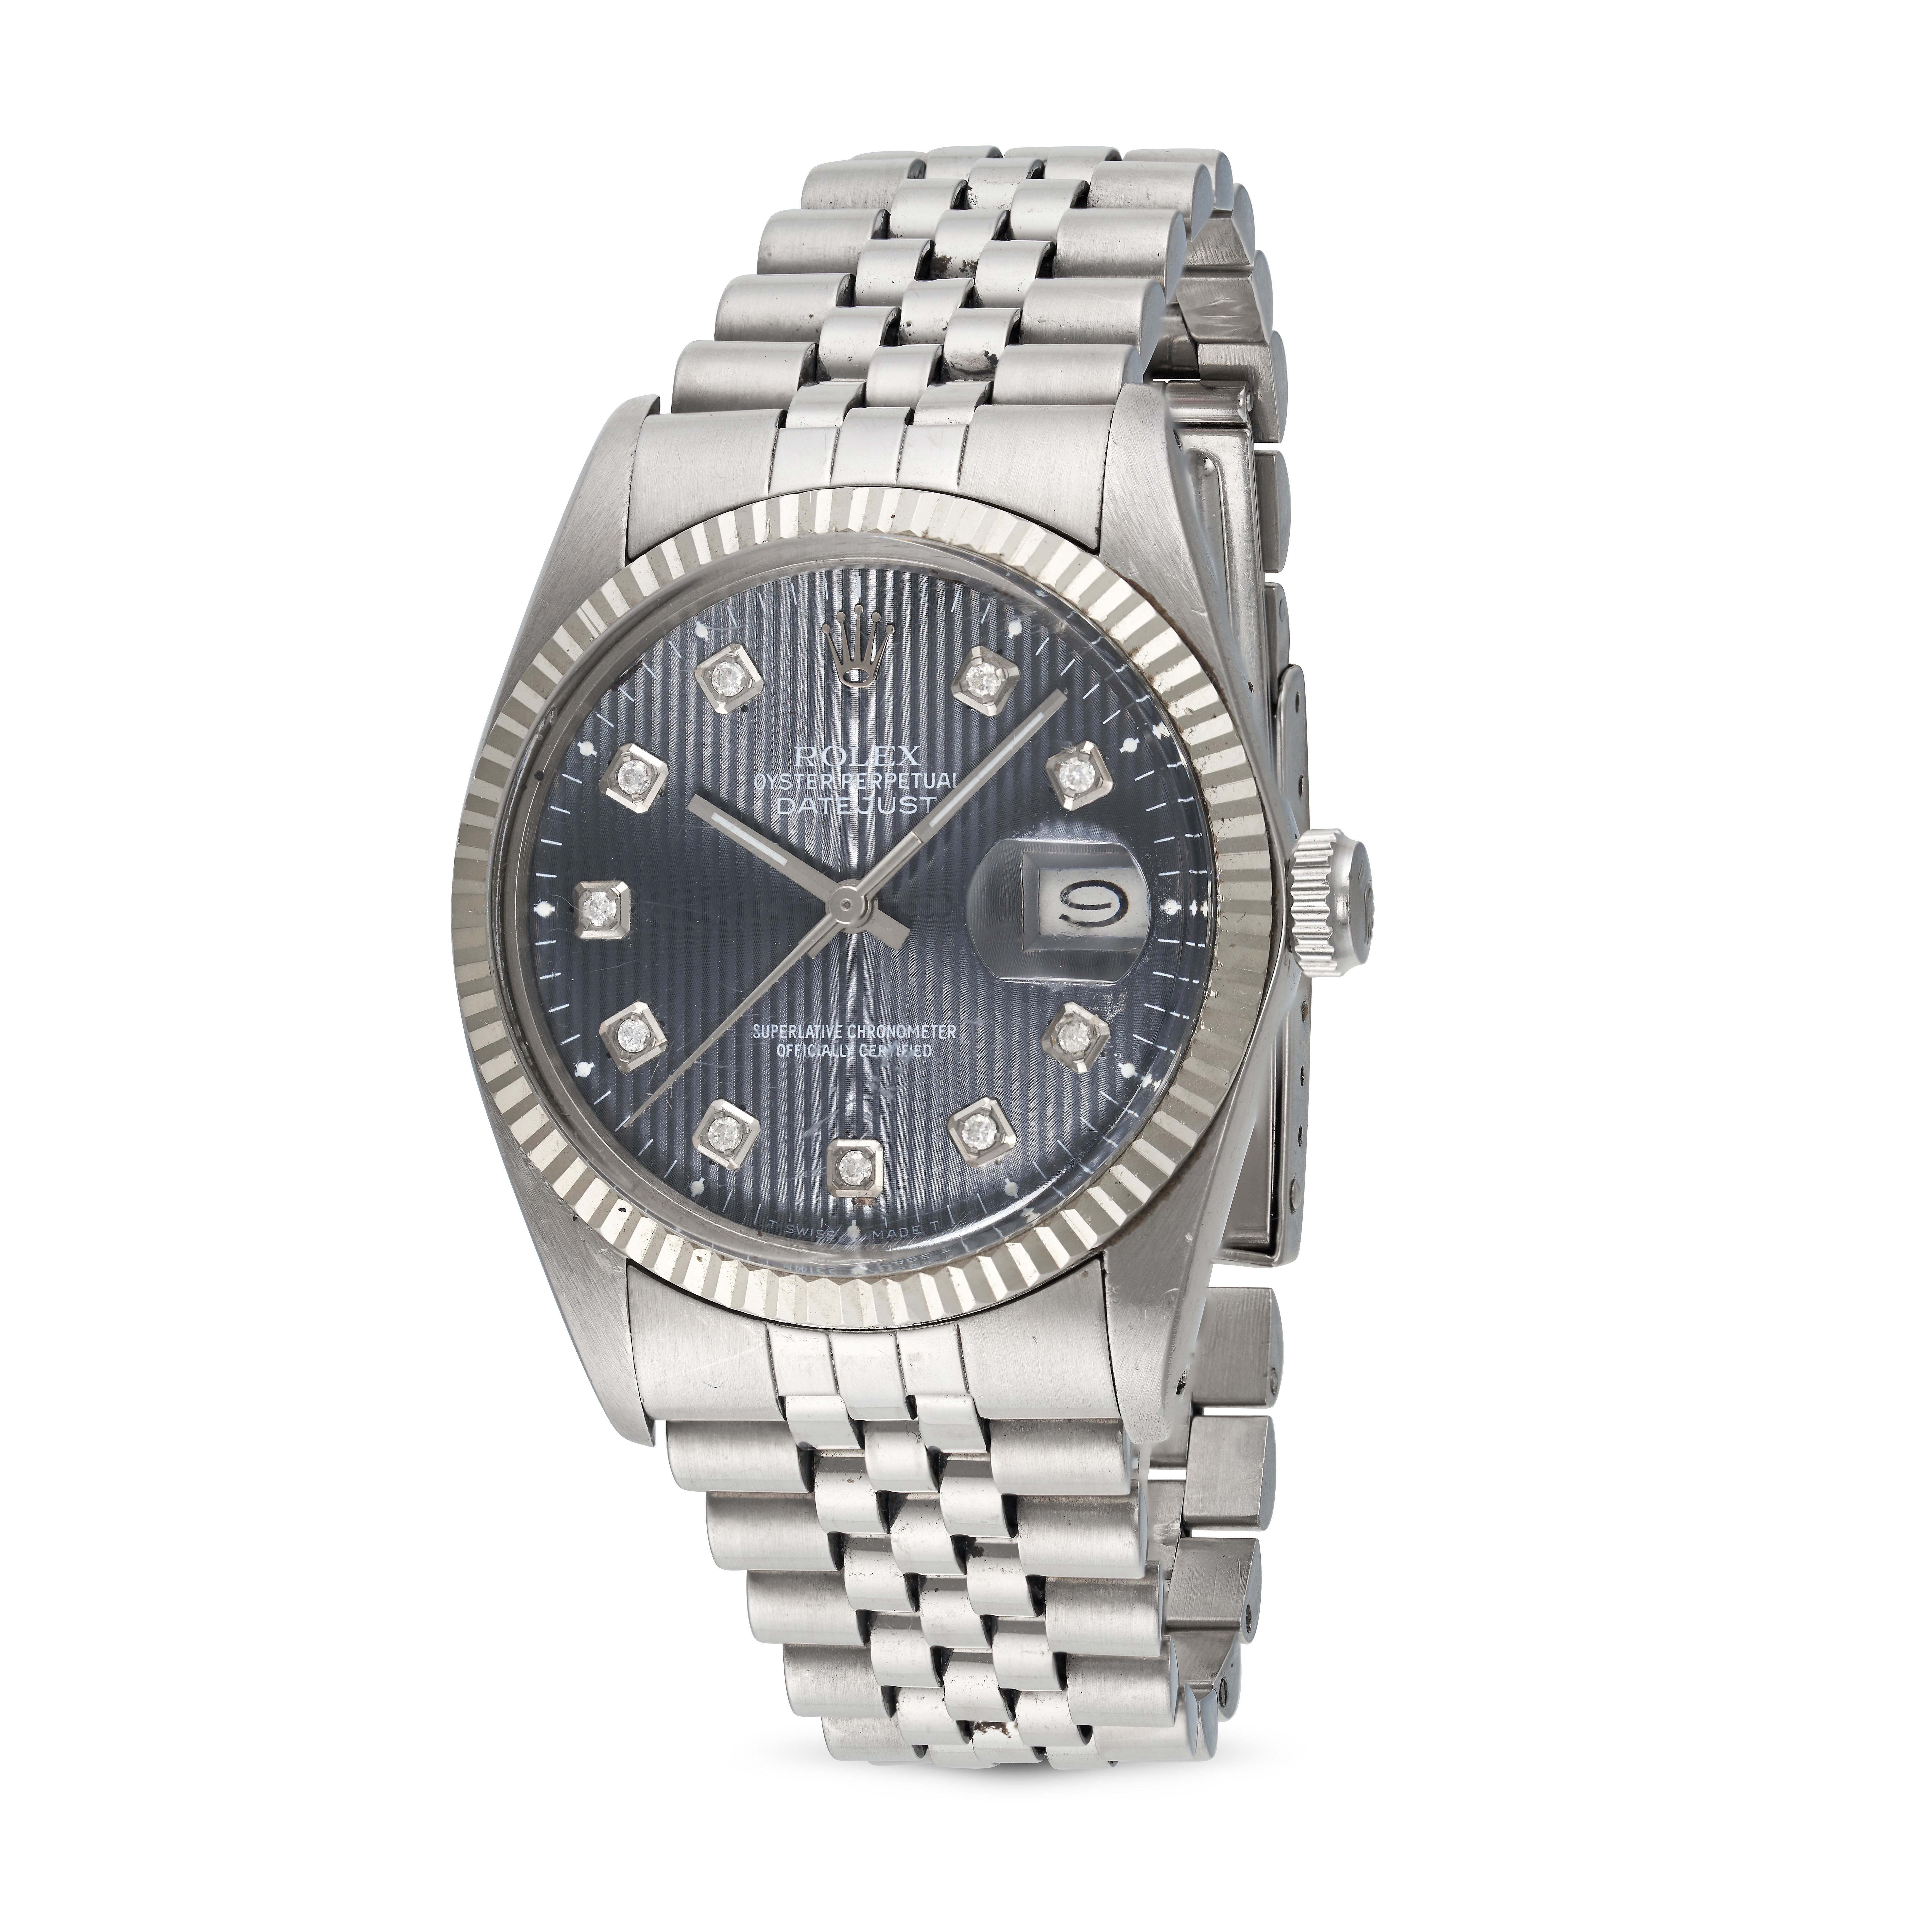 ROLEX - A ROLEX OYSTER PERPETUAL DATEJUST WRISTWATCH in stainless steel, model number 16014, seri...